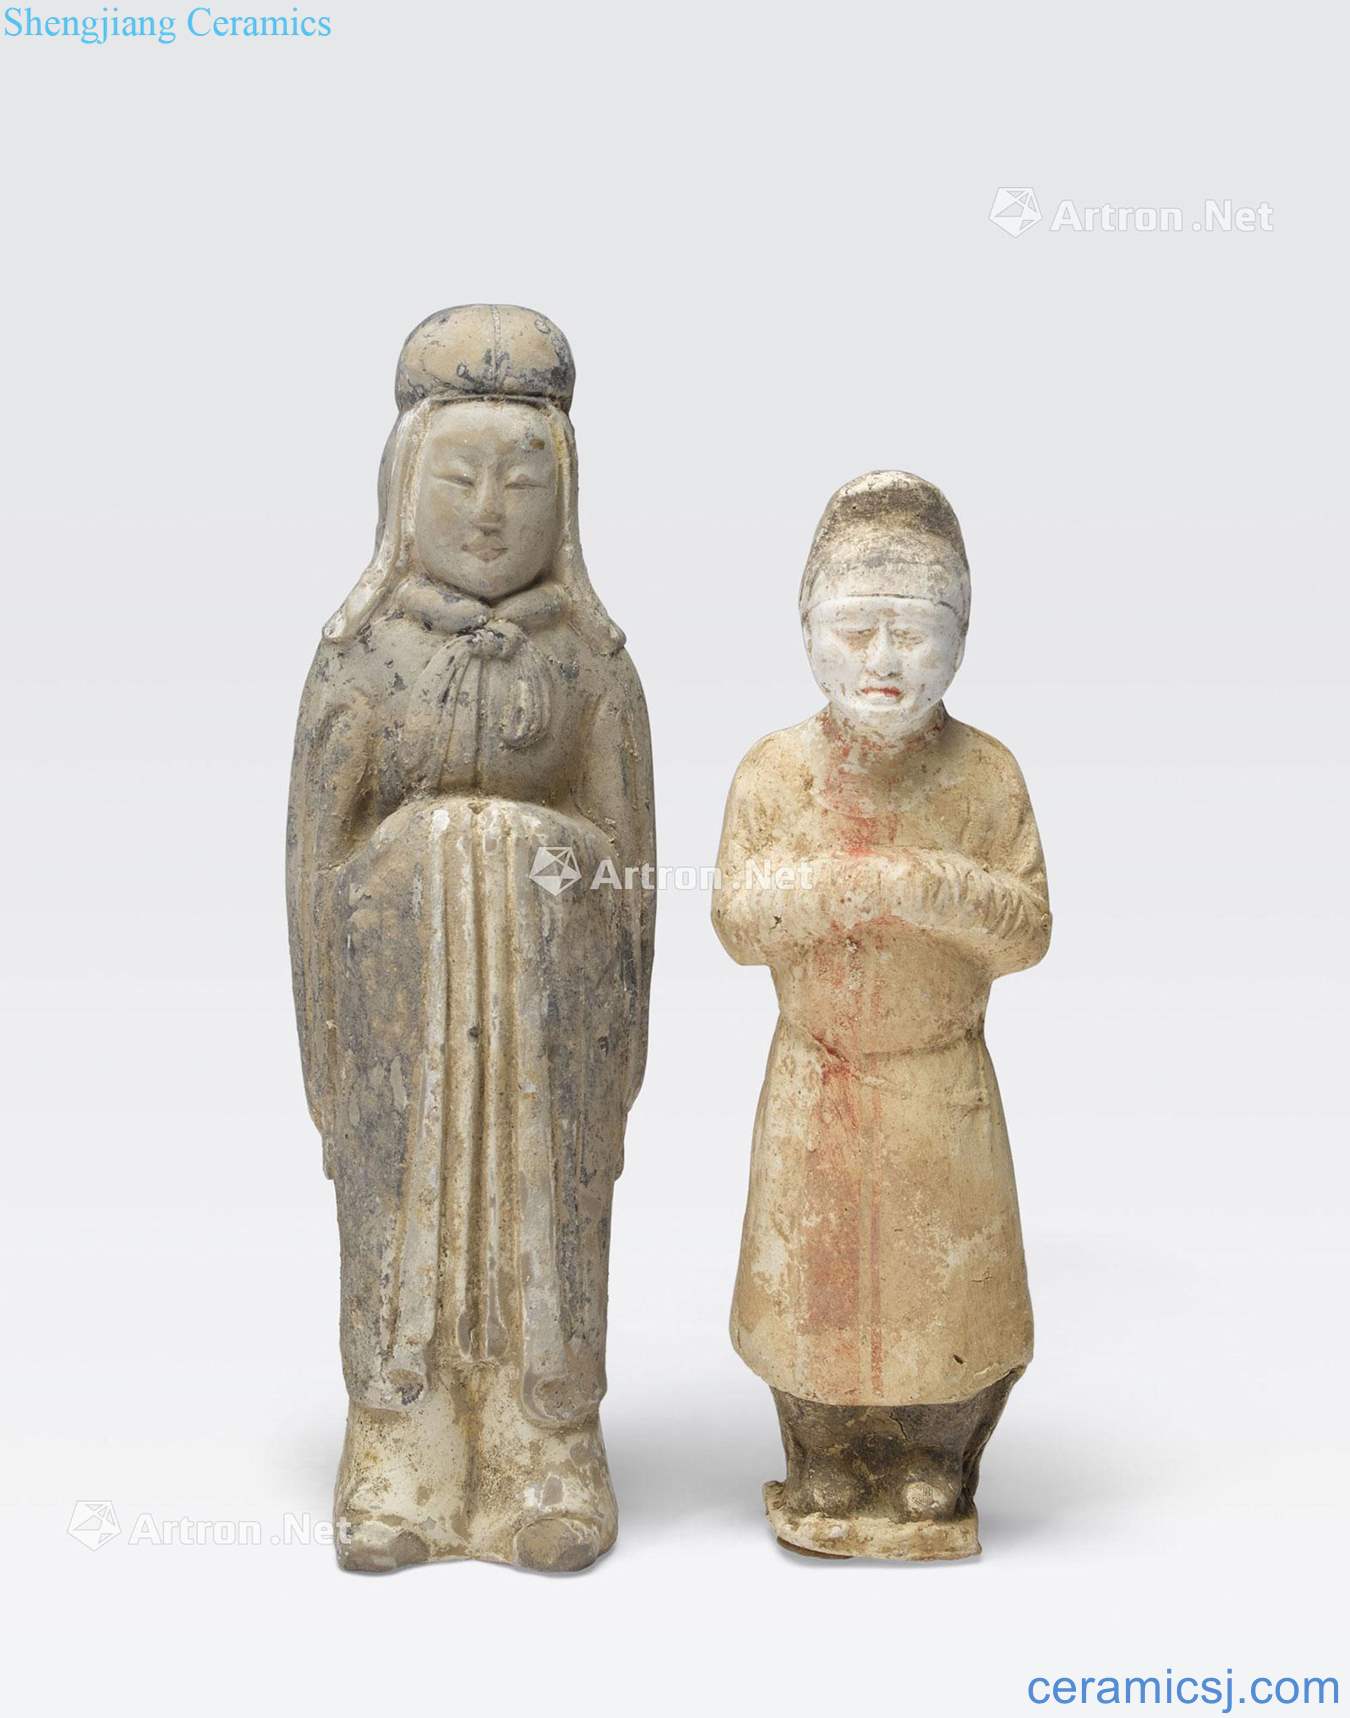 The TWO made POTTERY TOMB FIGURES